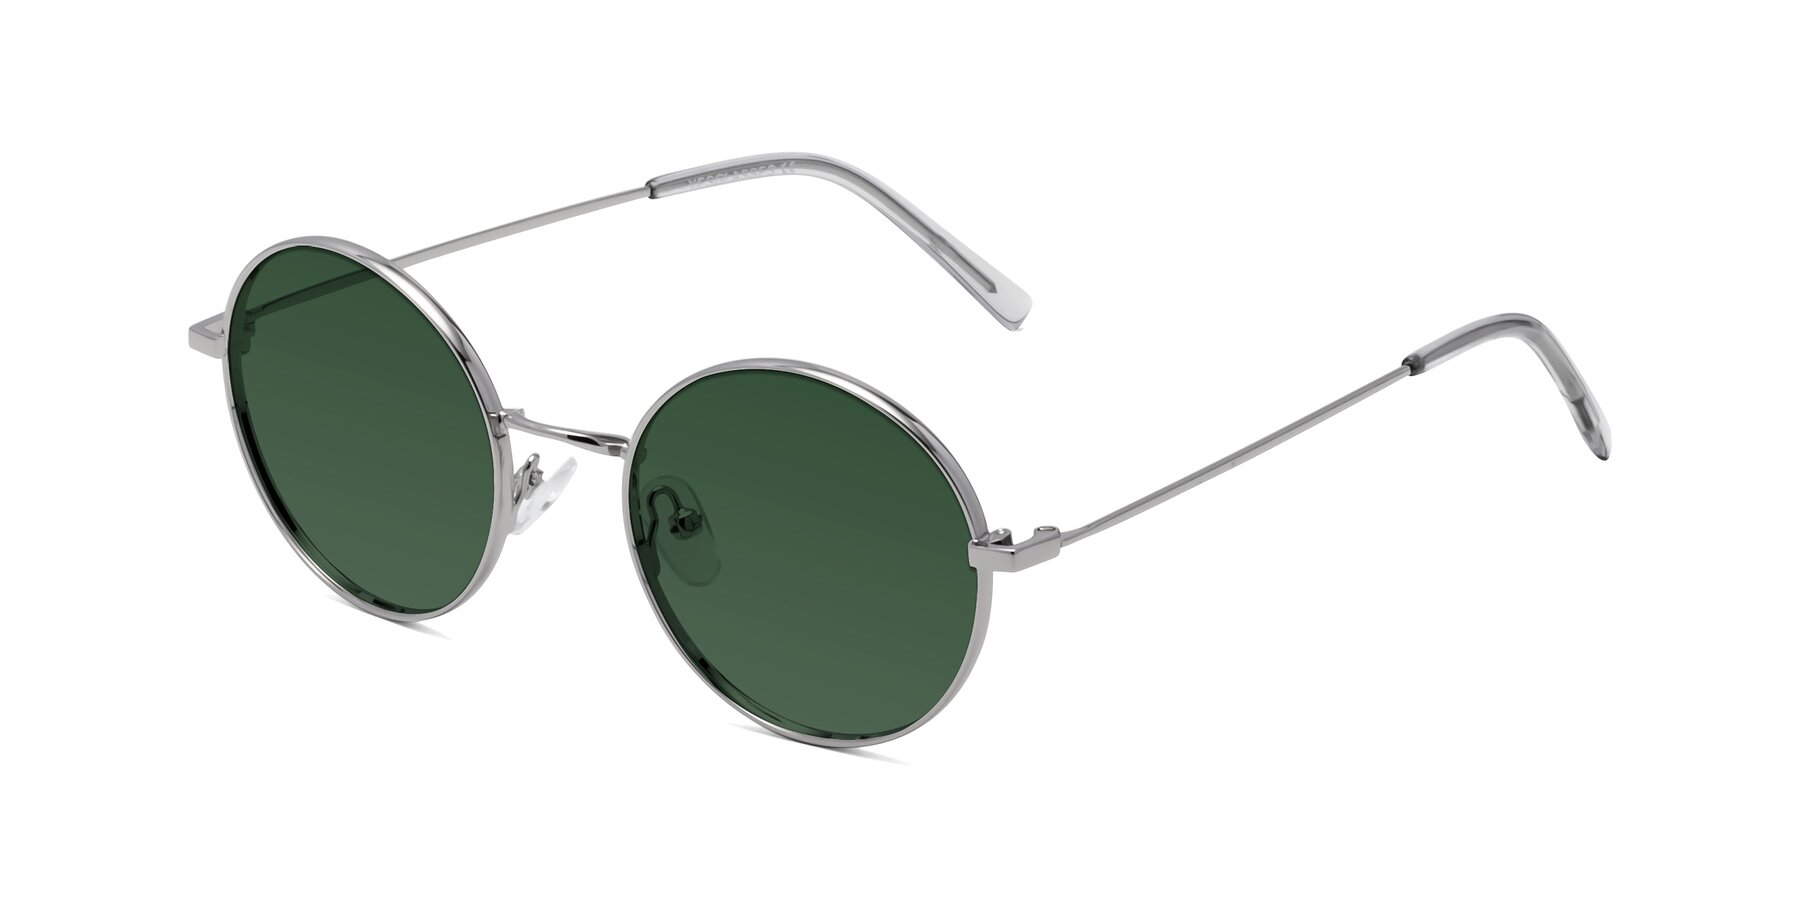 Silver Retro-Vintage Metal Round Tinted Sunglasses with Green Sunwear Lenses